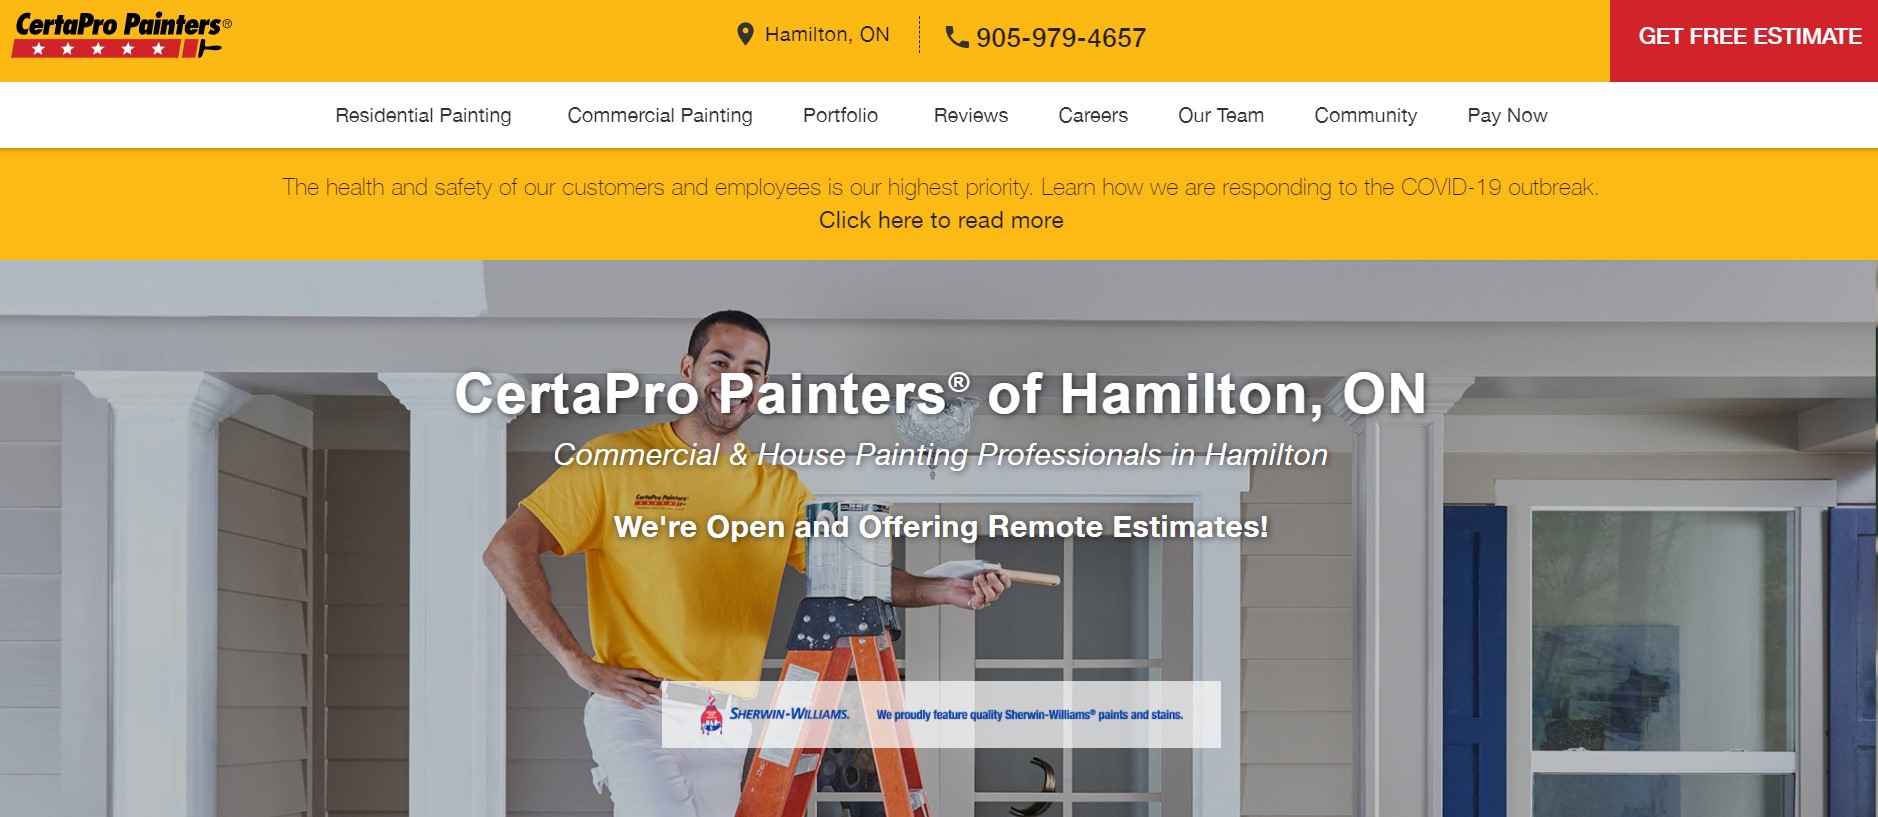 certapro painting service in hamilton